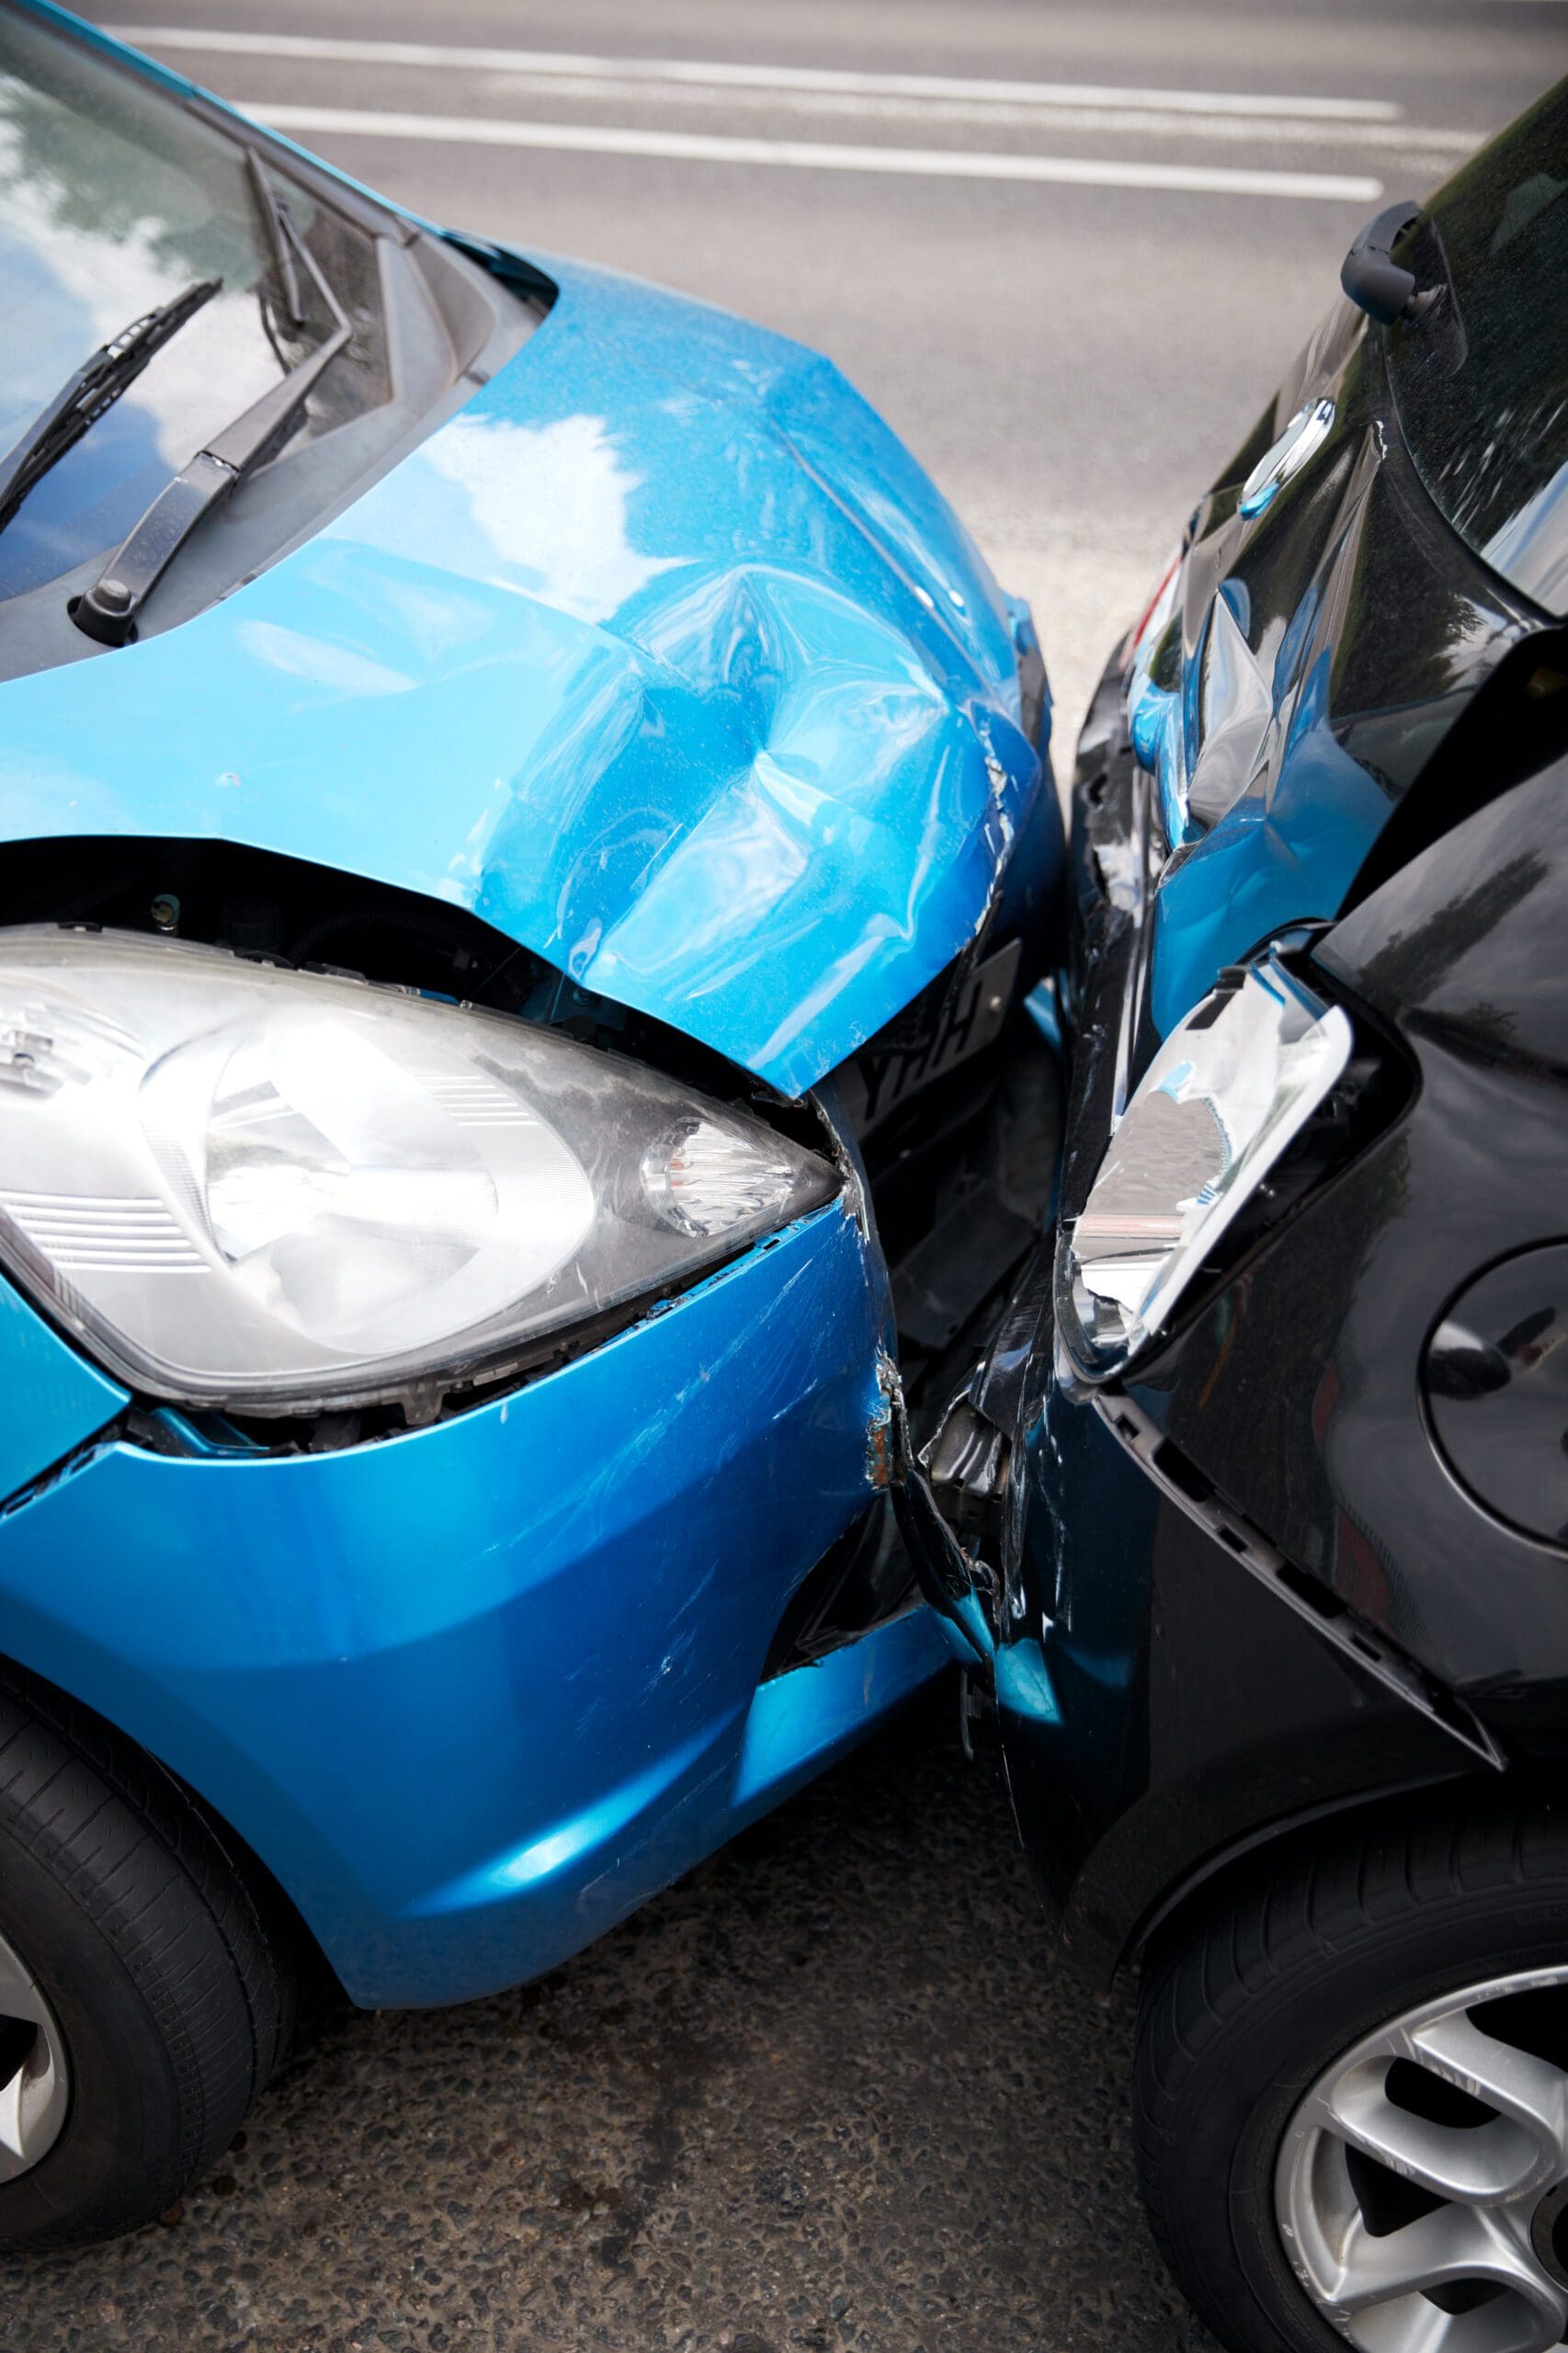 https://www.accidentinjurylawyers.claims/wp-content/uploads/2022/12/close-up-of-two-cars-damaged-in-road-traffic-accid-2021-08-26-16-14-36-utc-scaled.jpg